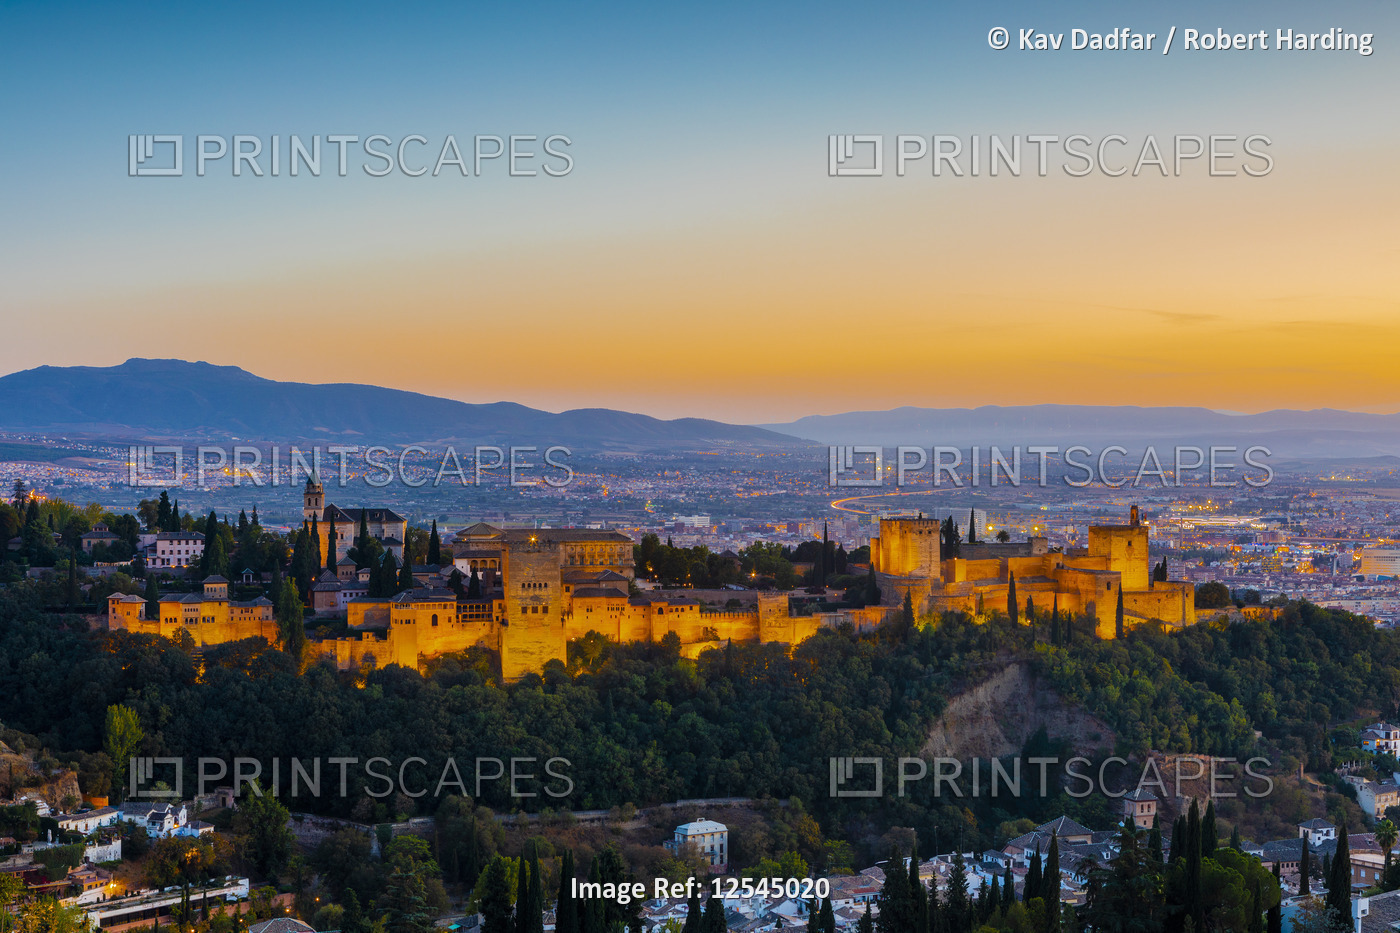 View of Alhambra and Sierra Nevada mountains at dusk, Granada, Andalucia, Spain, Europe